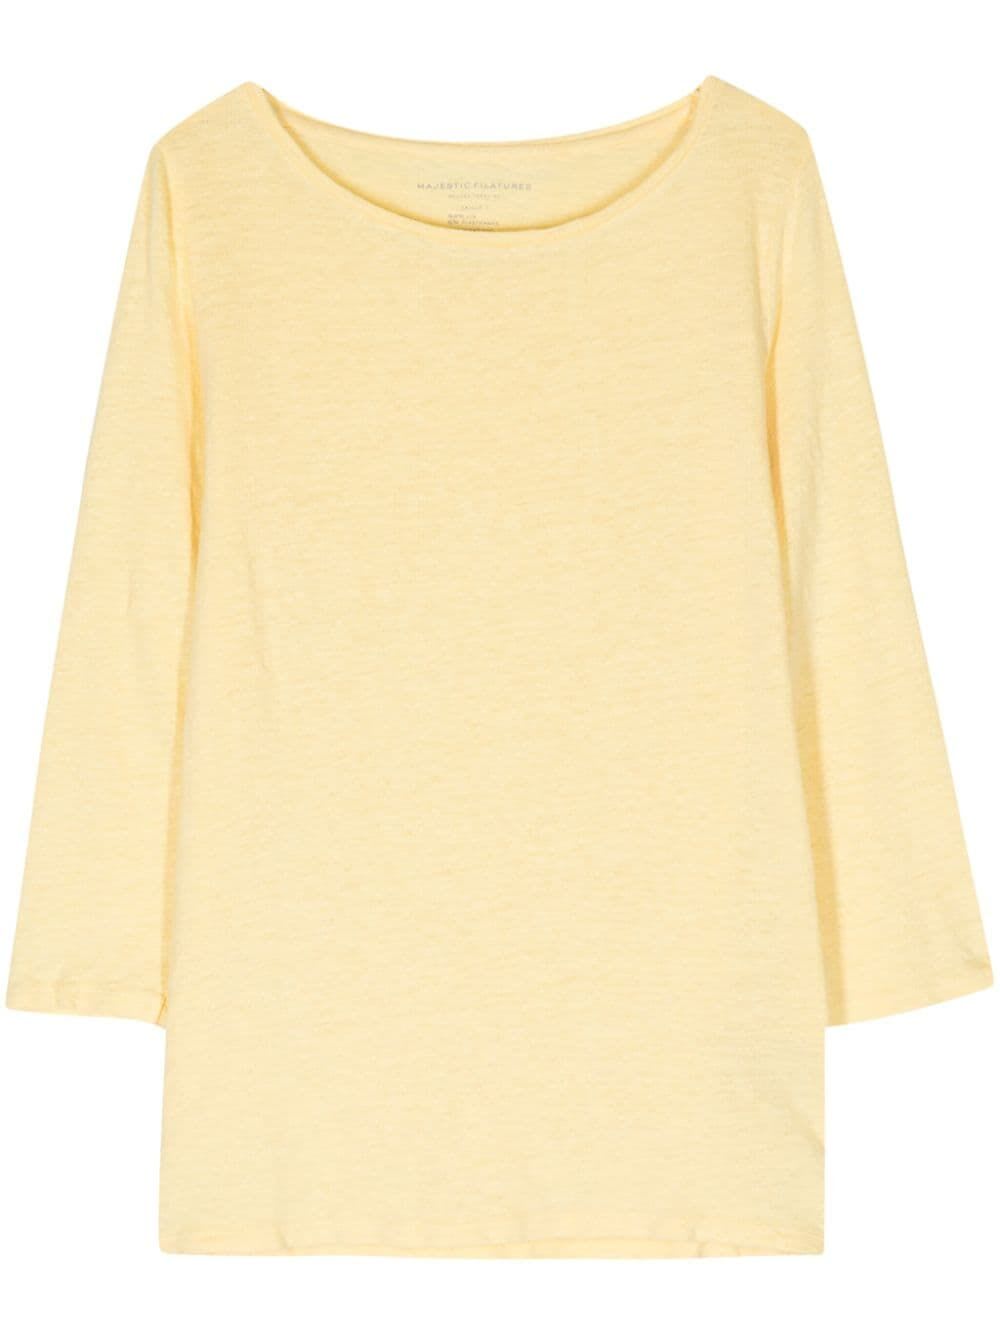 3/4 Sleeves Boat Neck T-shirt